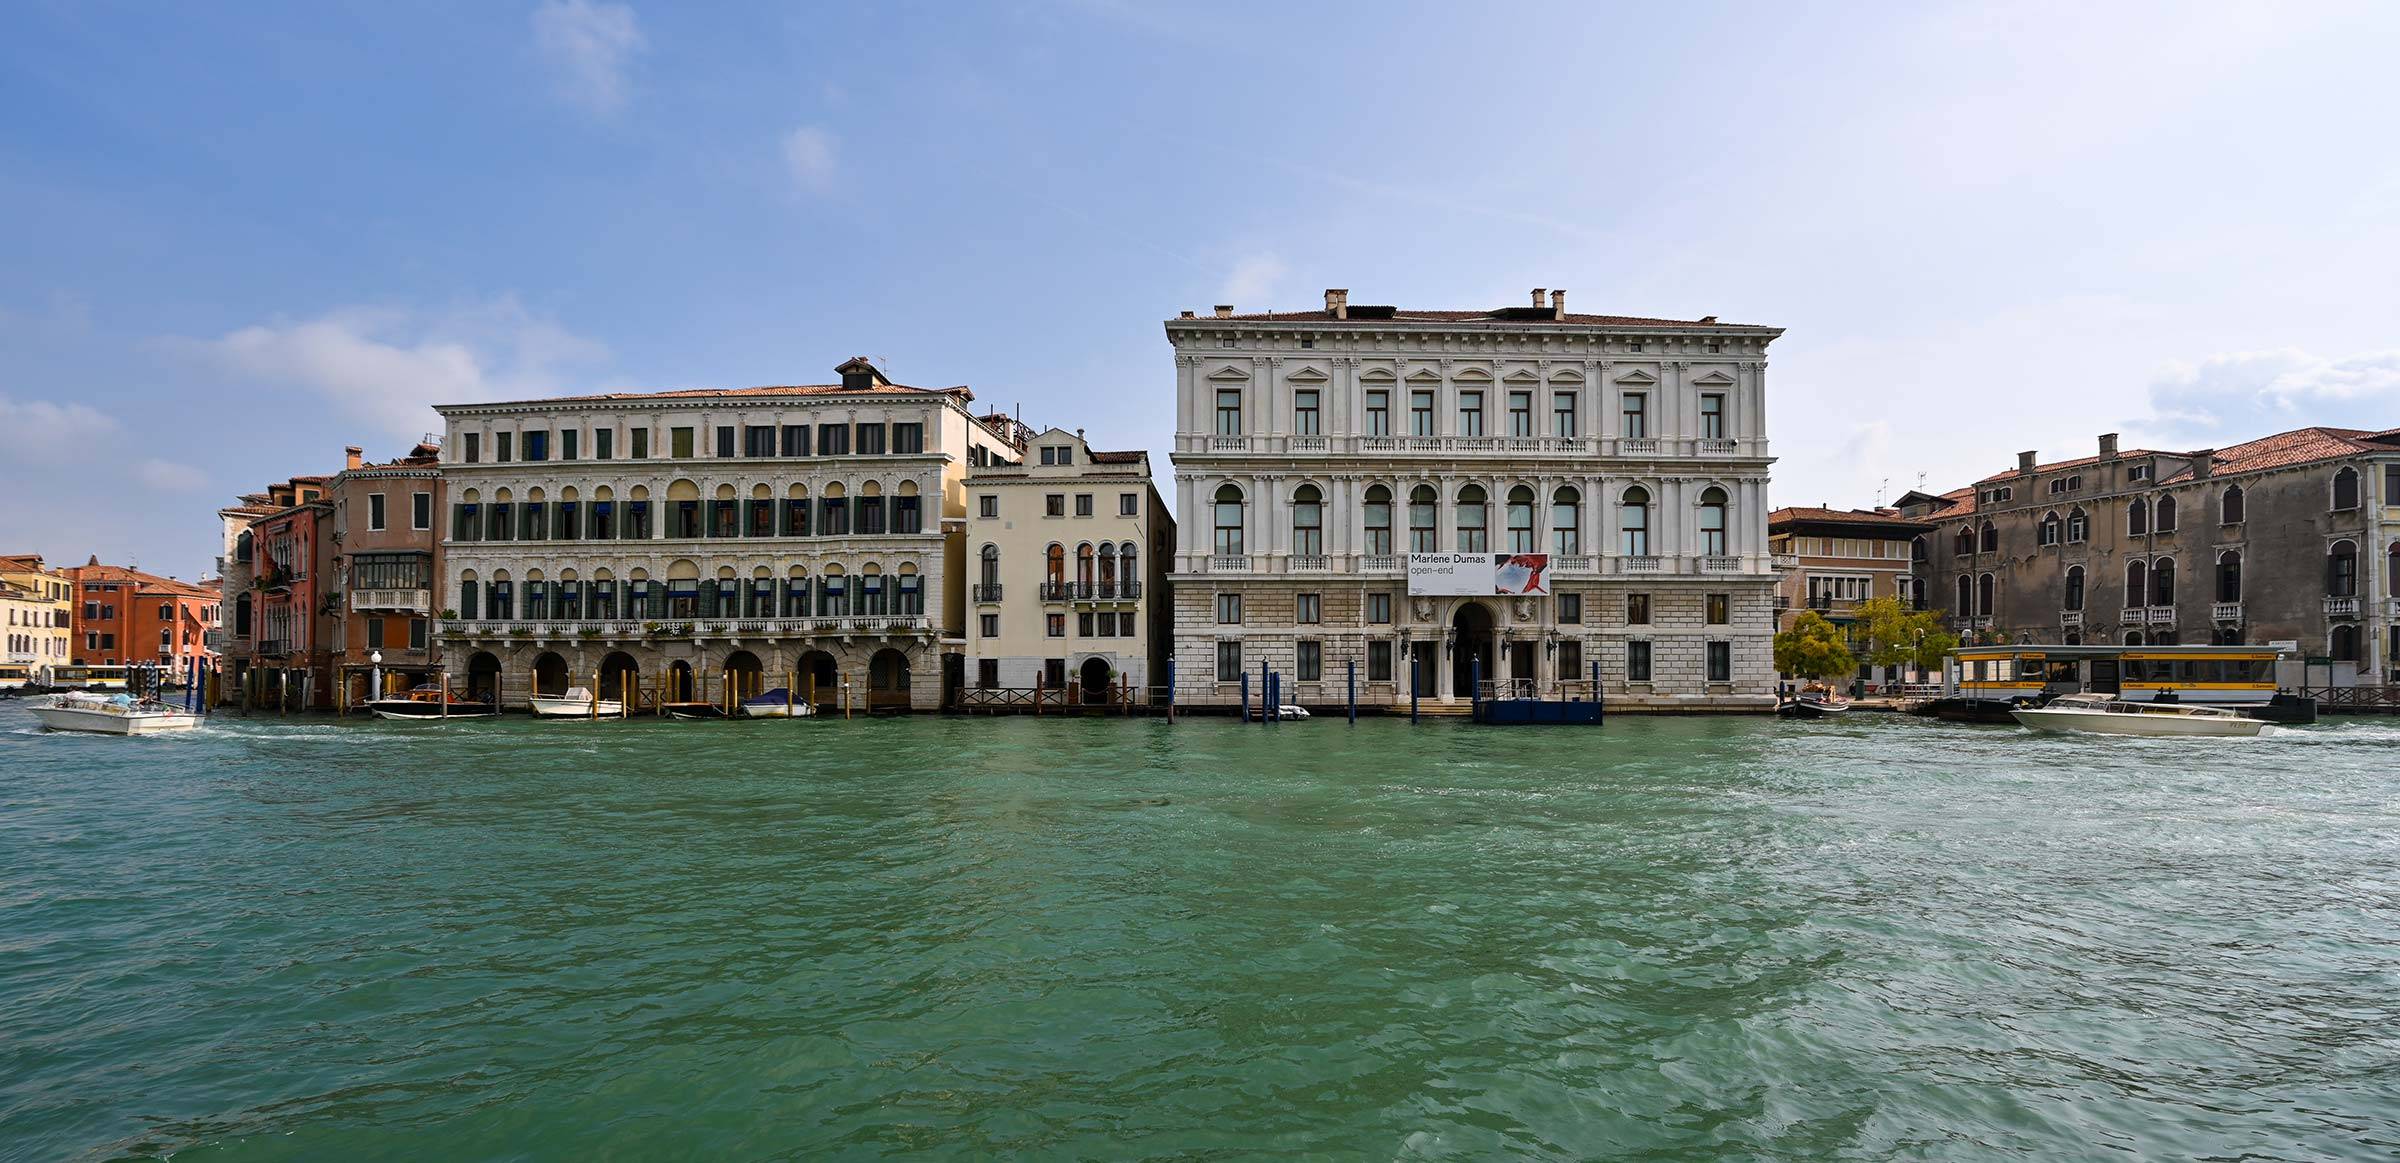 Rezzonico Palace - view on the Grand Canal